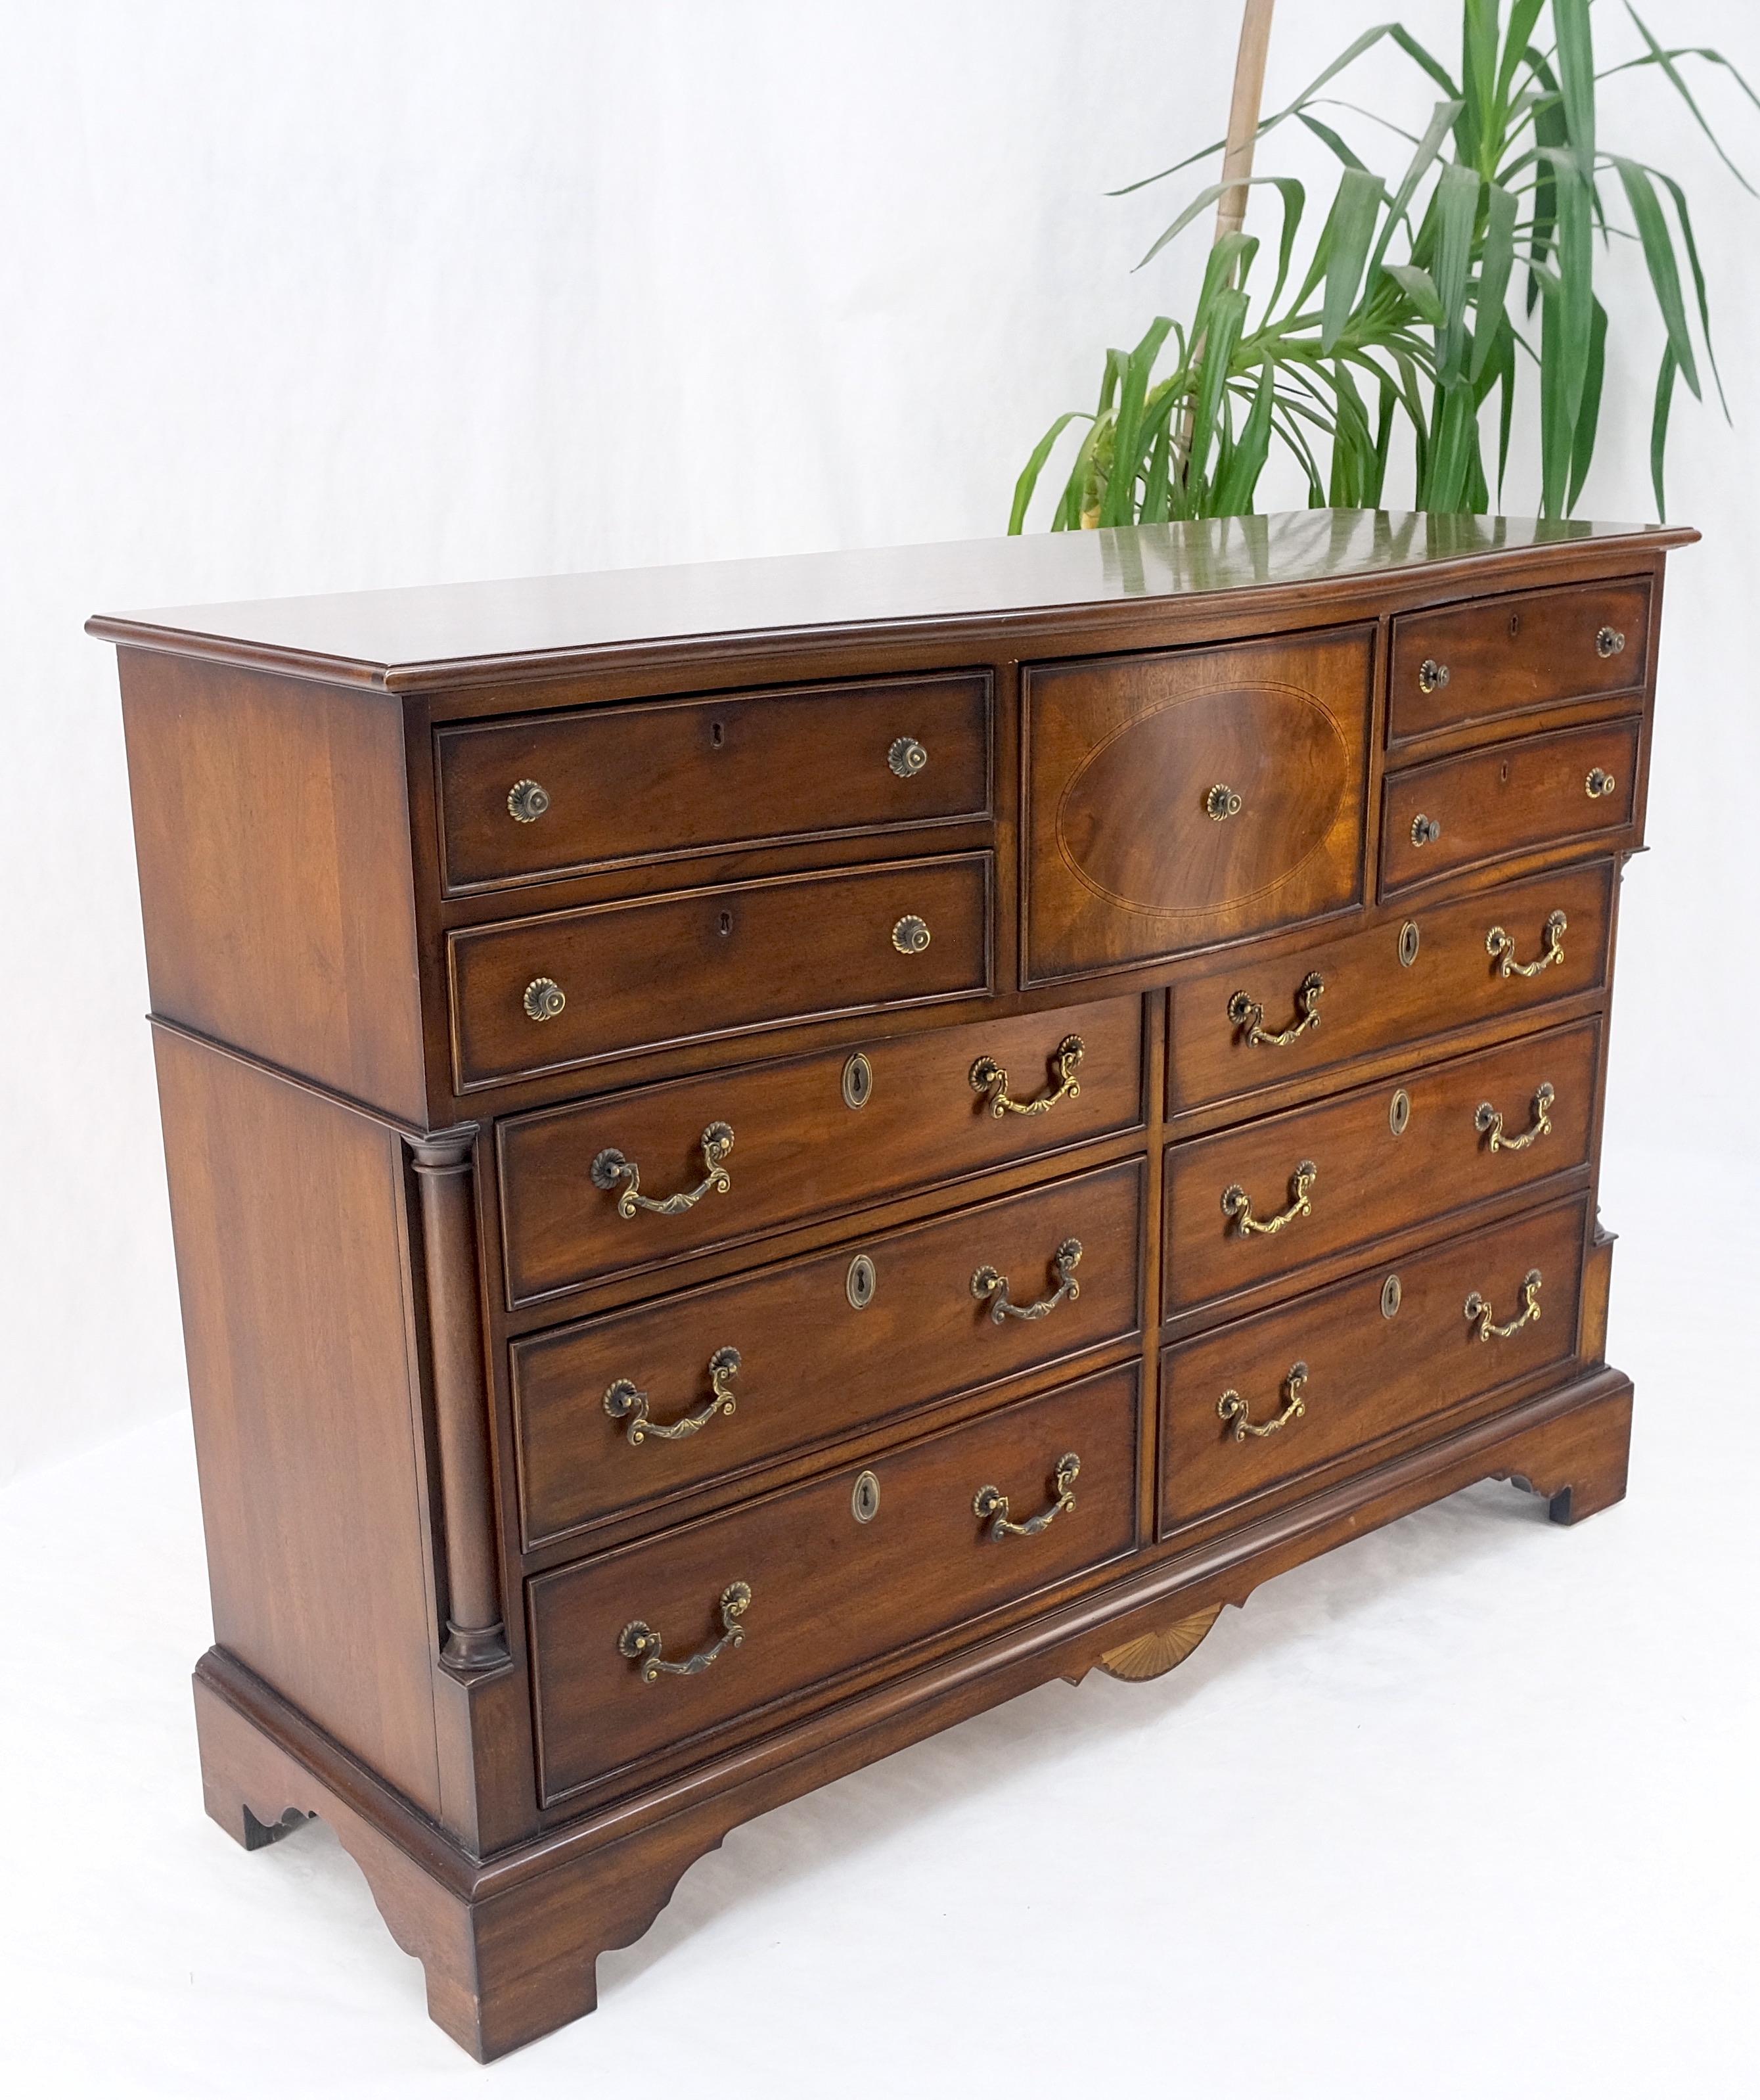 Banded Top Mahogany Inlayed Bracket Feet 11 Drawers Dresser Credenza MINT! For Sale 7